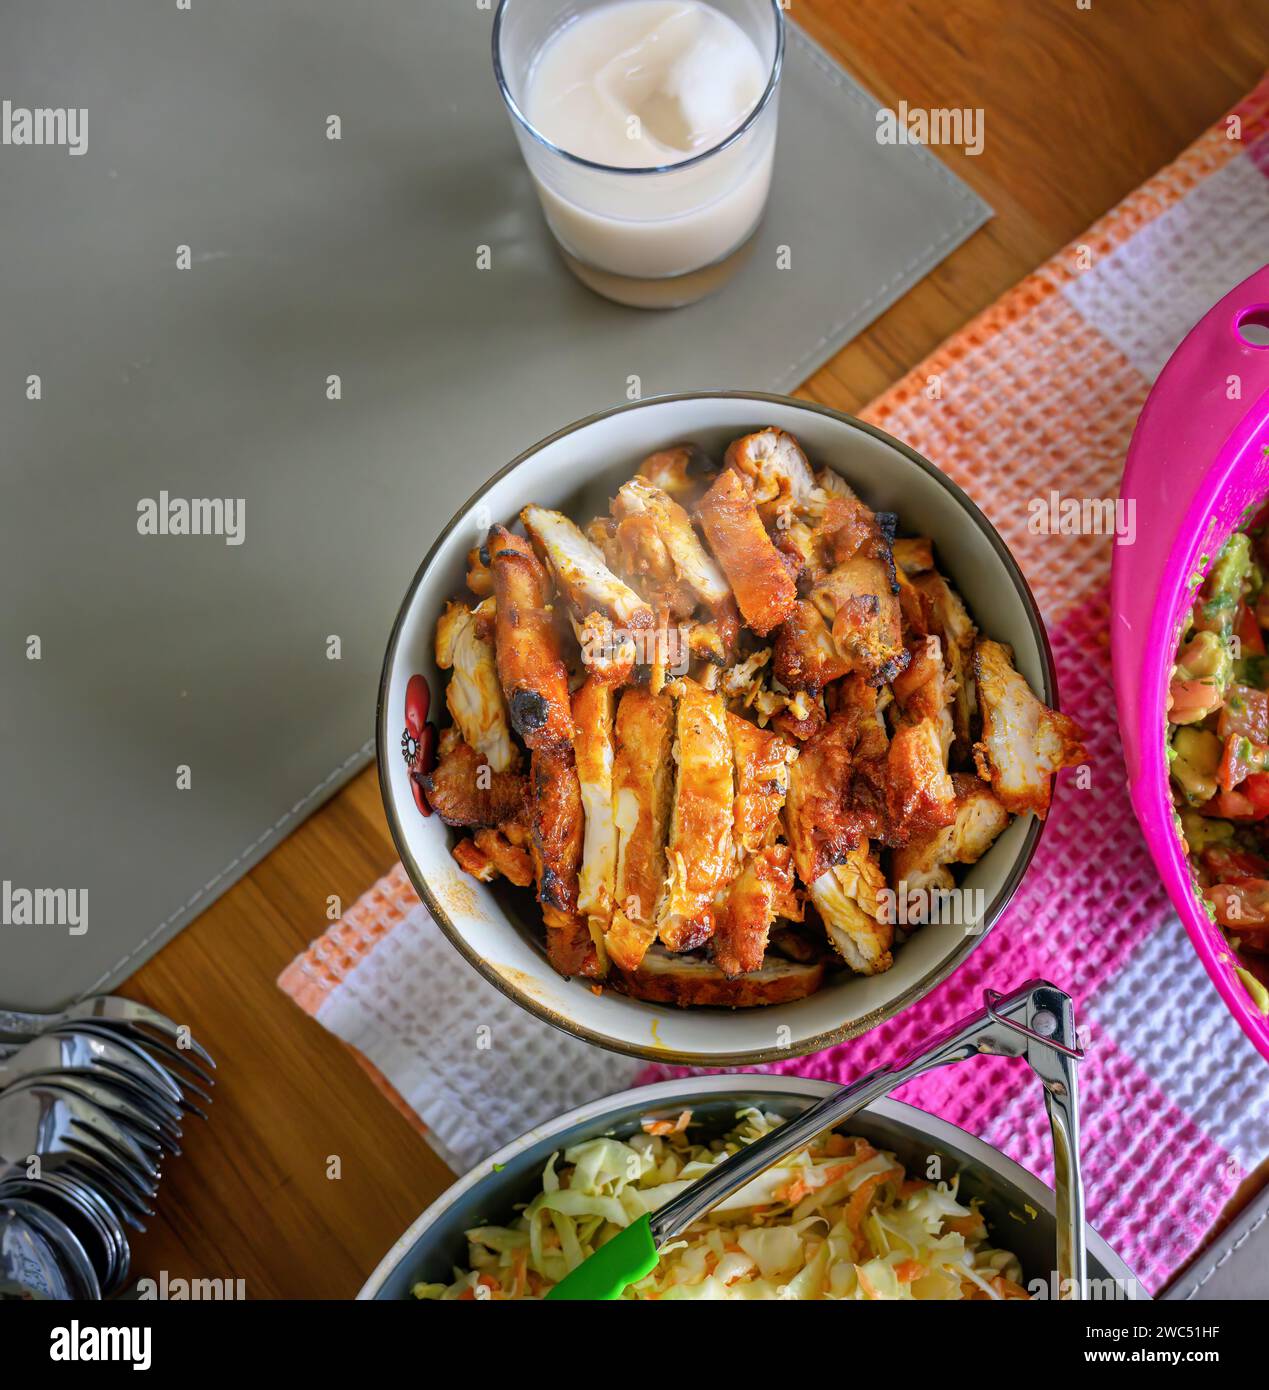 Roast chicken and cabbage coleslaw on the dinner table. Home cooking and entertainment concept. Stock Photo